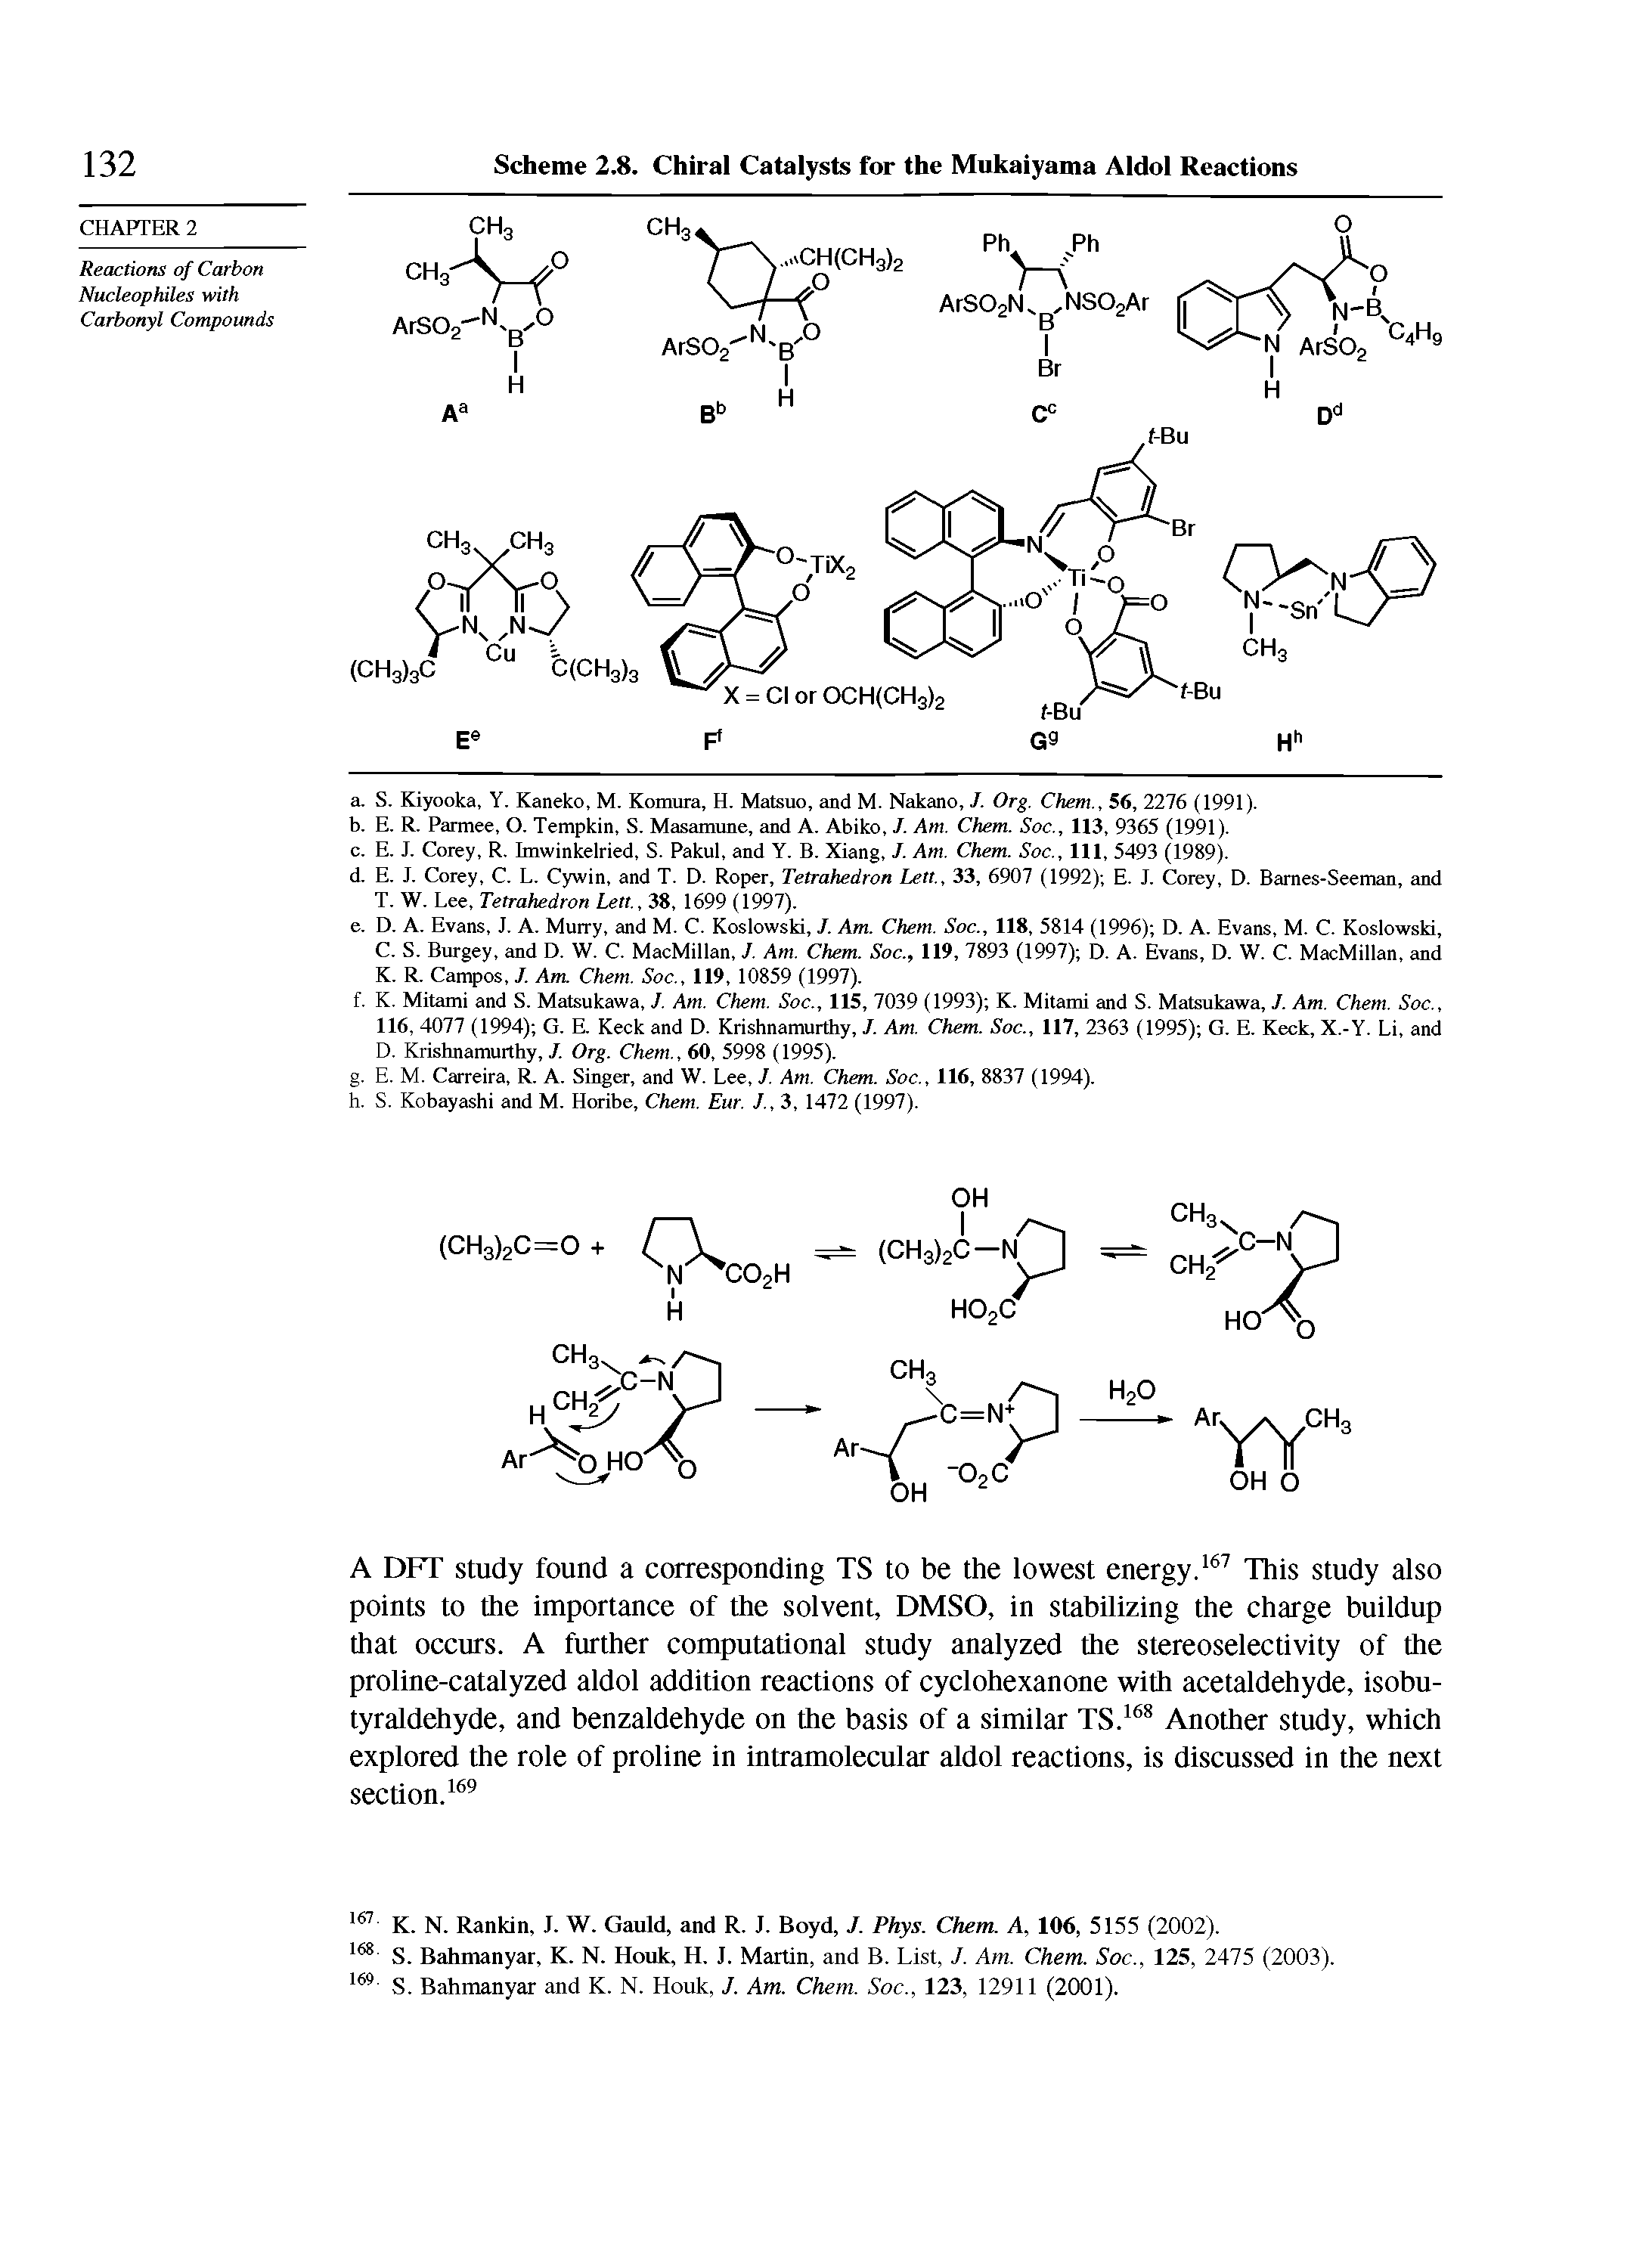 Scheme 2.8. Chiral Catalysts for the Mukaiyama Aldol Reactions...